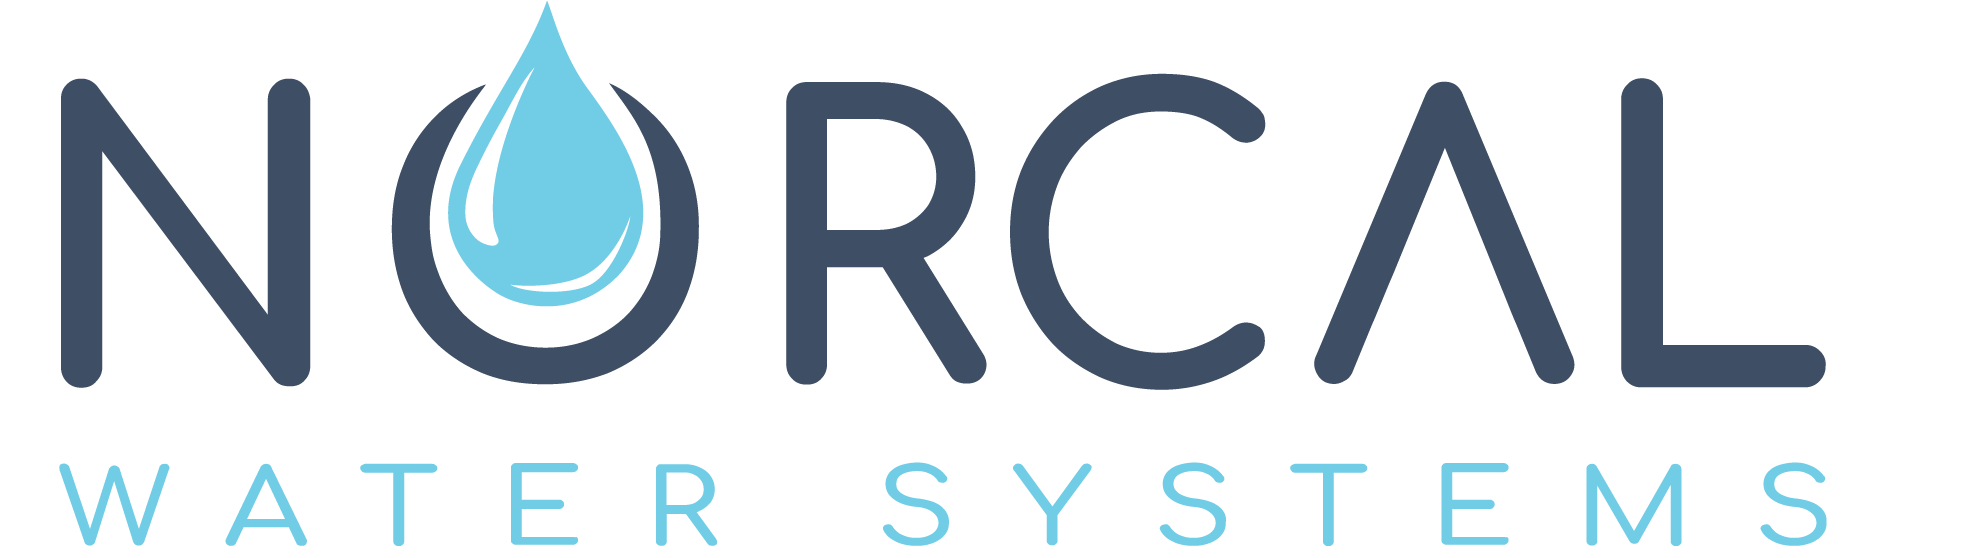 Norcal Water Systems, Inc. Logo